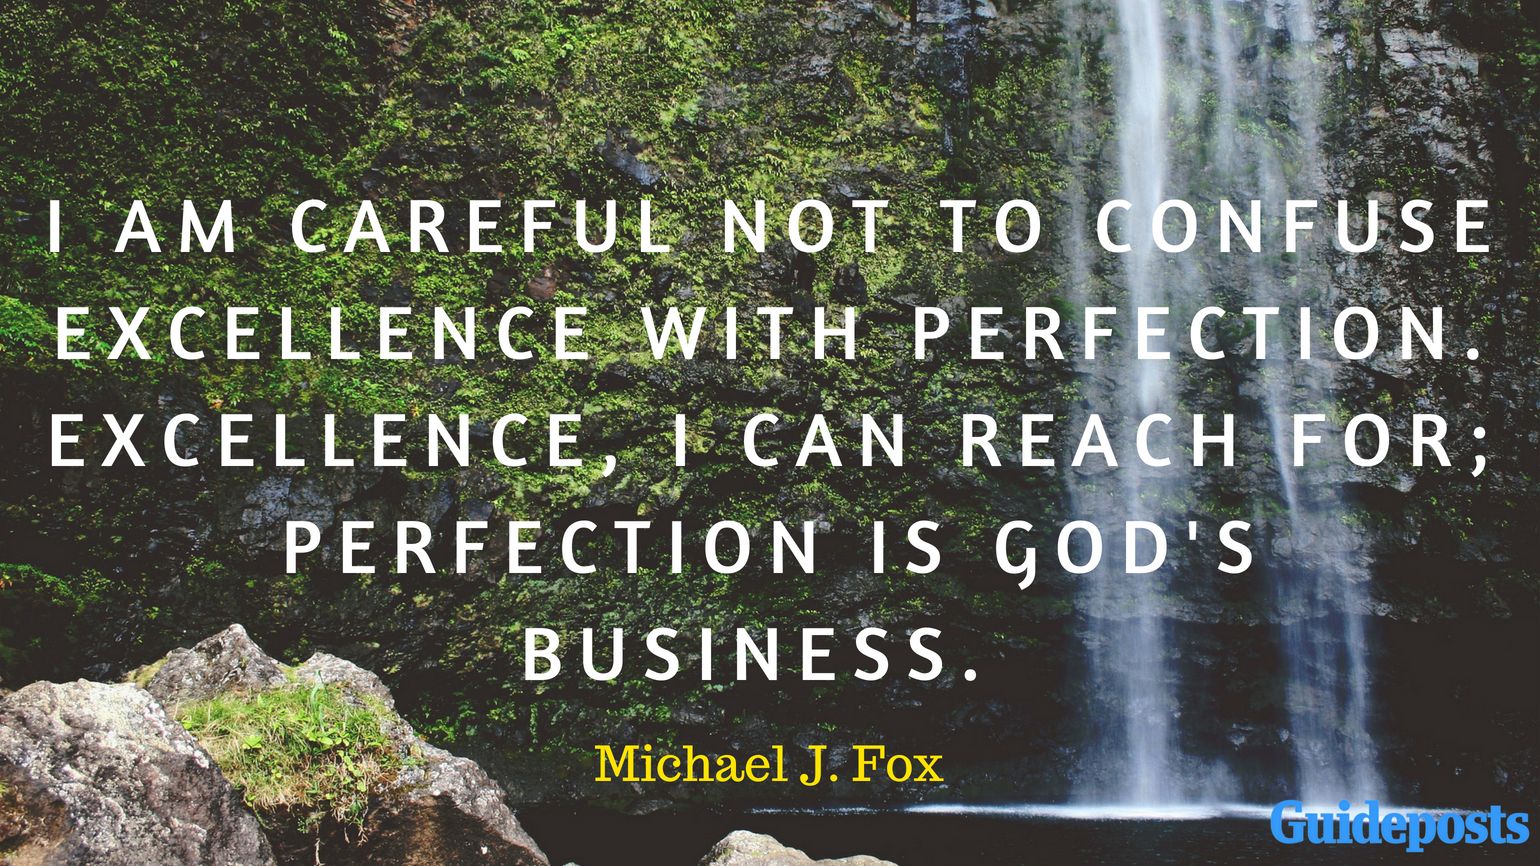 I am careful not to confuse excellence with perfection. Excellence, I can reach for; perfection is God's business. - Michael J. Fox